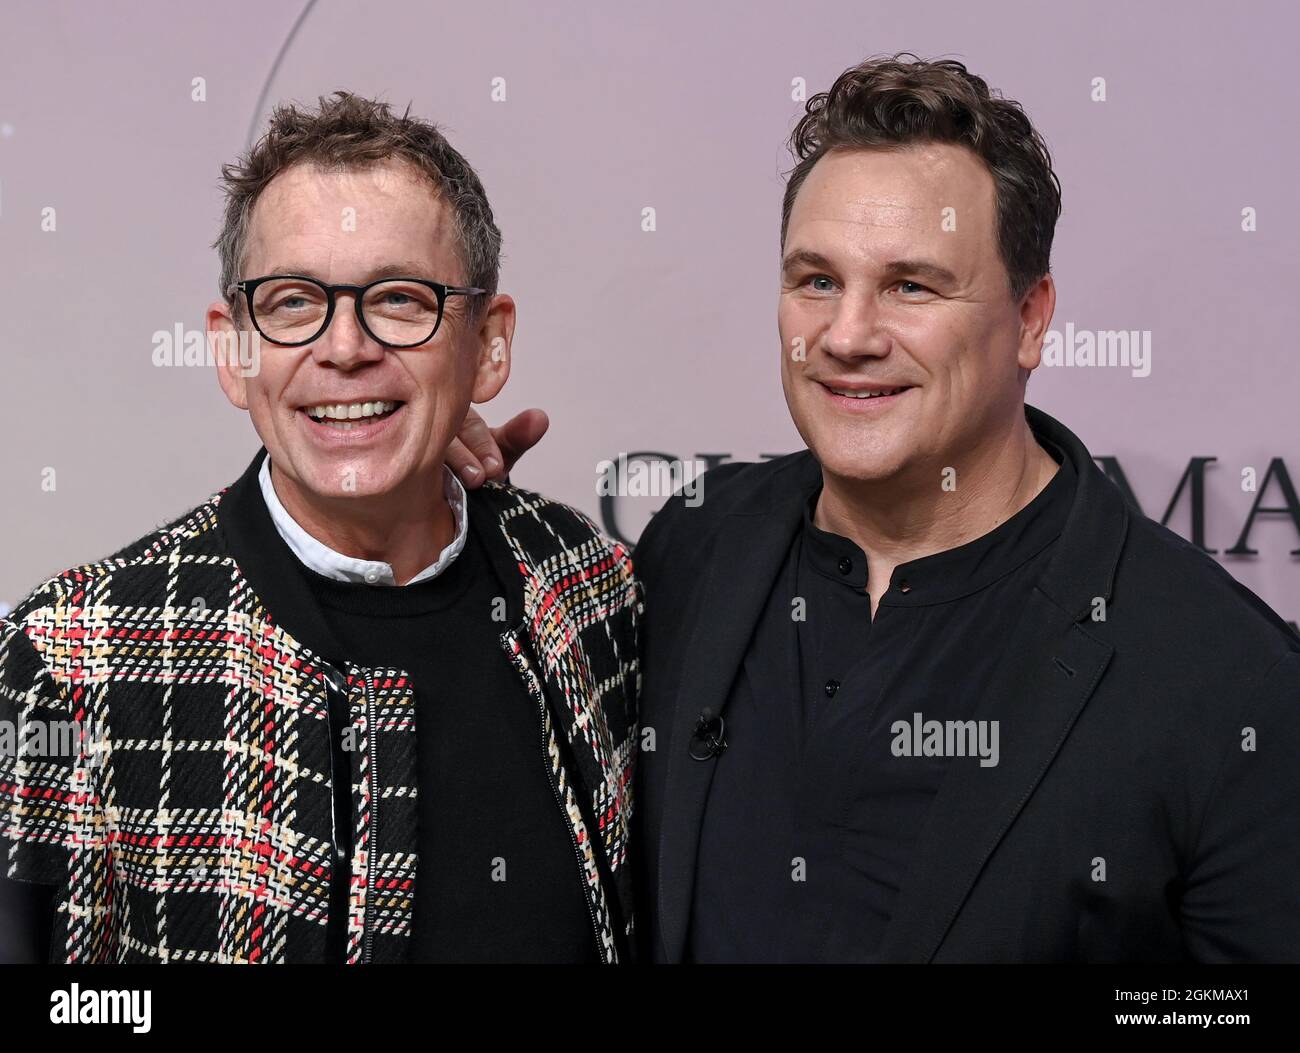 Berlin, Germany. 14th Sep, 2021. Frank Mutters (l) and his husband Guido Maria Kretschmer arrive at the Kraftwerk for Guido Maria Kretschmer's fashion show as part of the About You Fashion Week. About You, or Re-Fashion Week, has been part of Berlin Fashion Week since 2021. About You Fashion Week runs from 11 to 15 September 2021. Credit: Jens Kalaene/dpa-Zentralbild/dpa/Alamy Live News Stock Photo